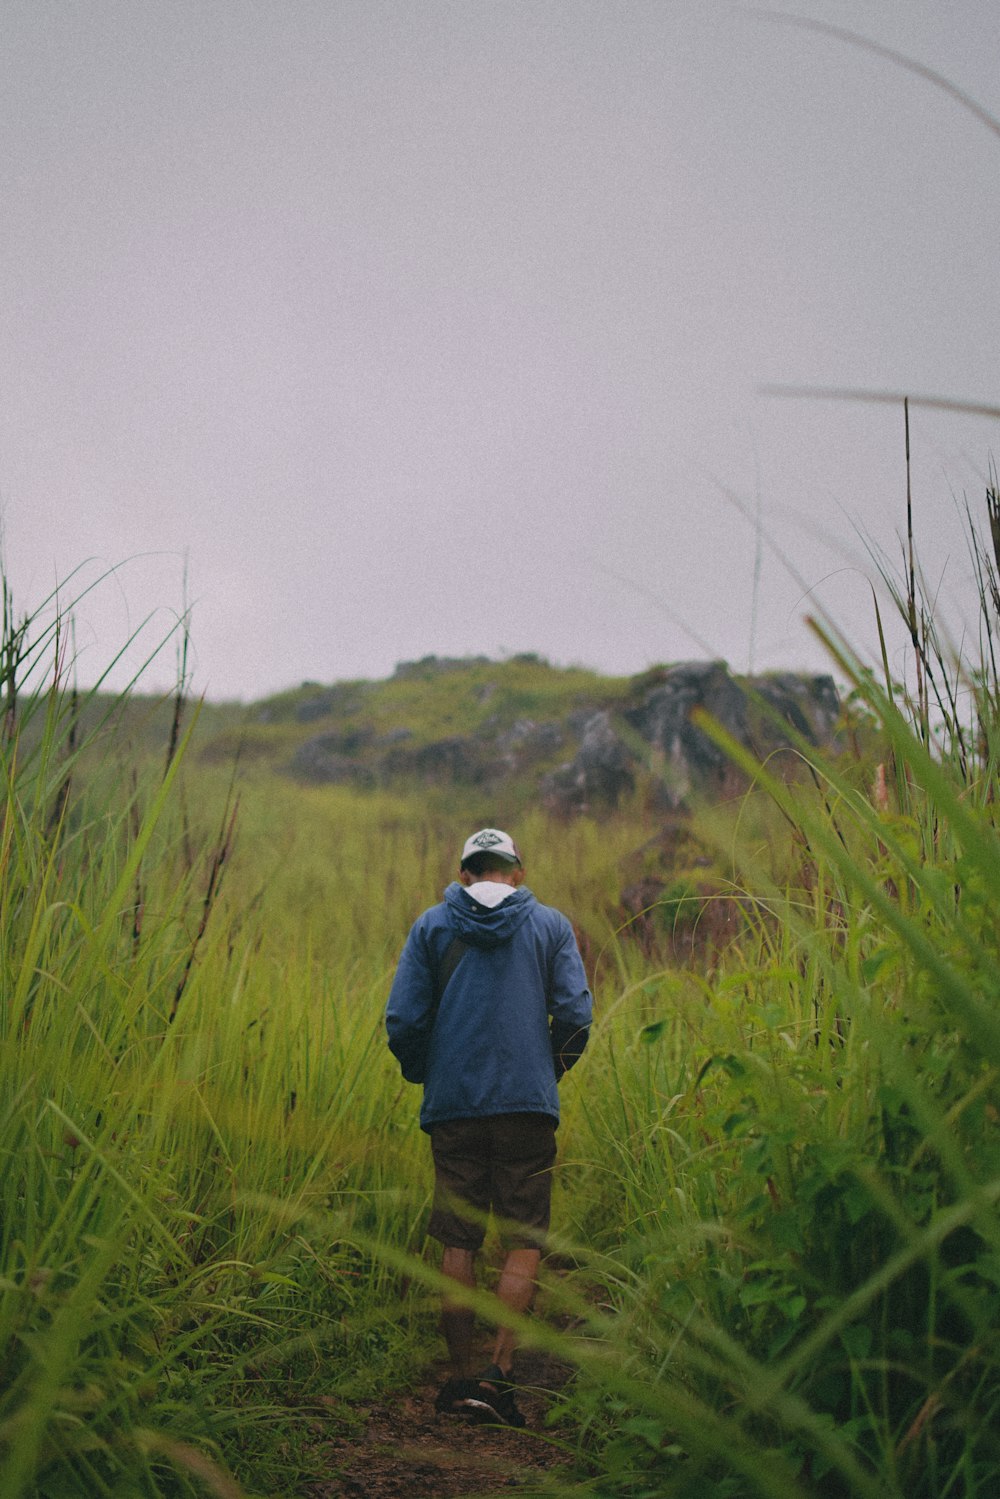 a man standing in a grassy area